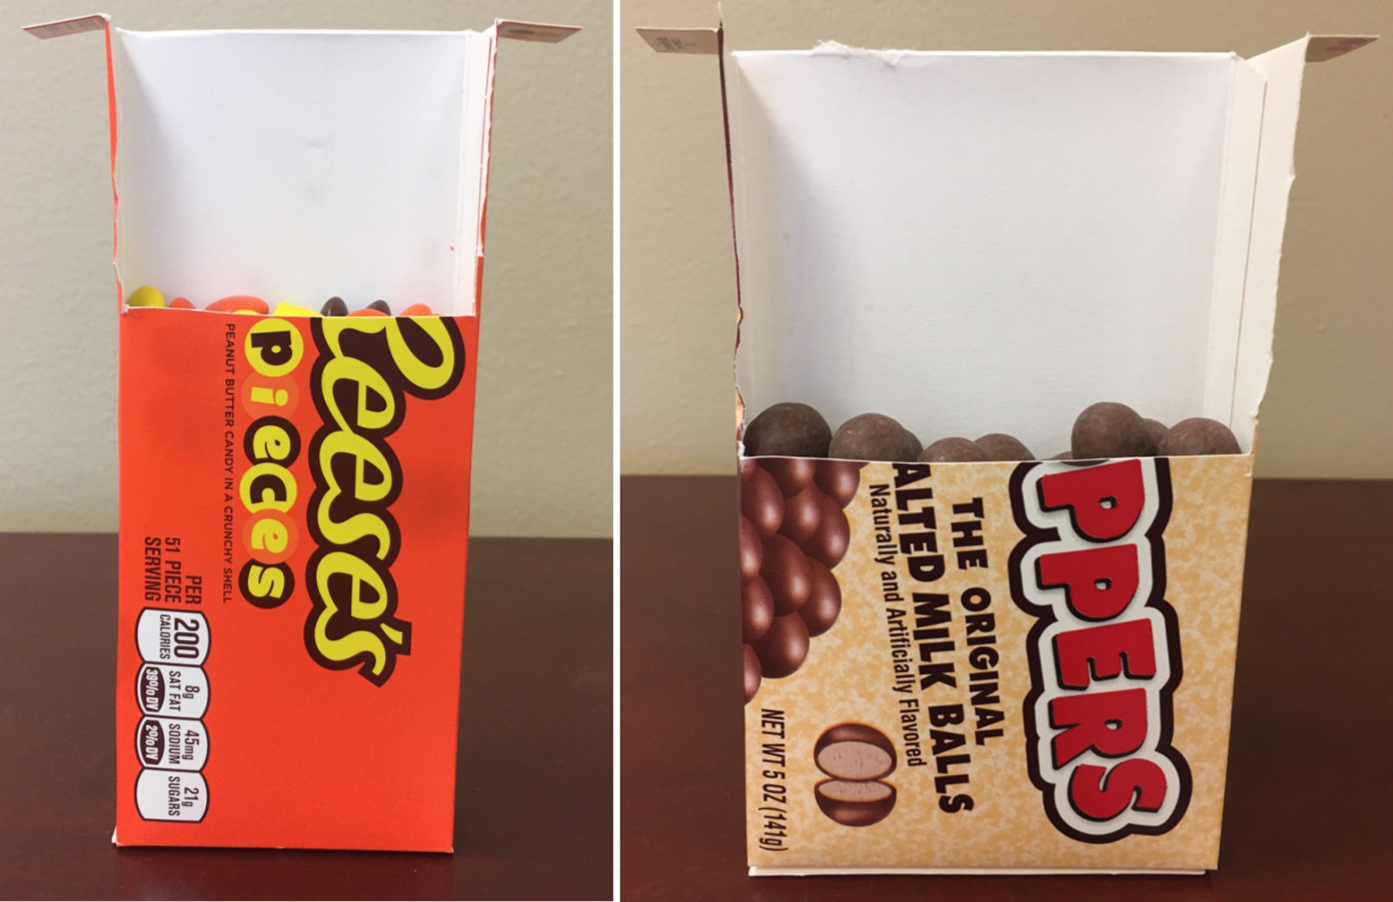 Federal Lawsuit Over Under-Filled Whoppers And Reese’s Pieces Boxes Goes Forward